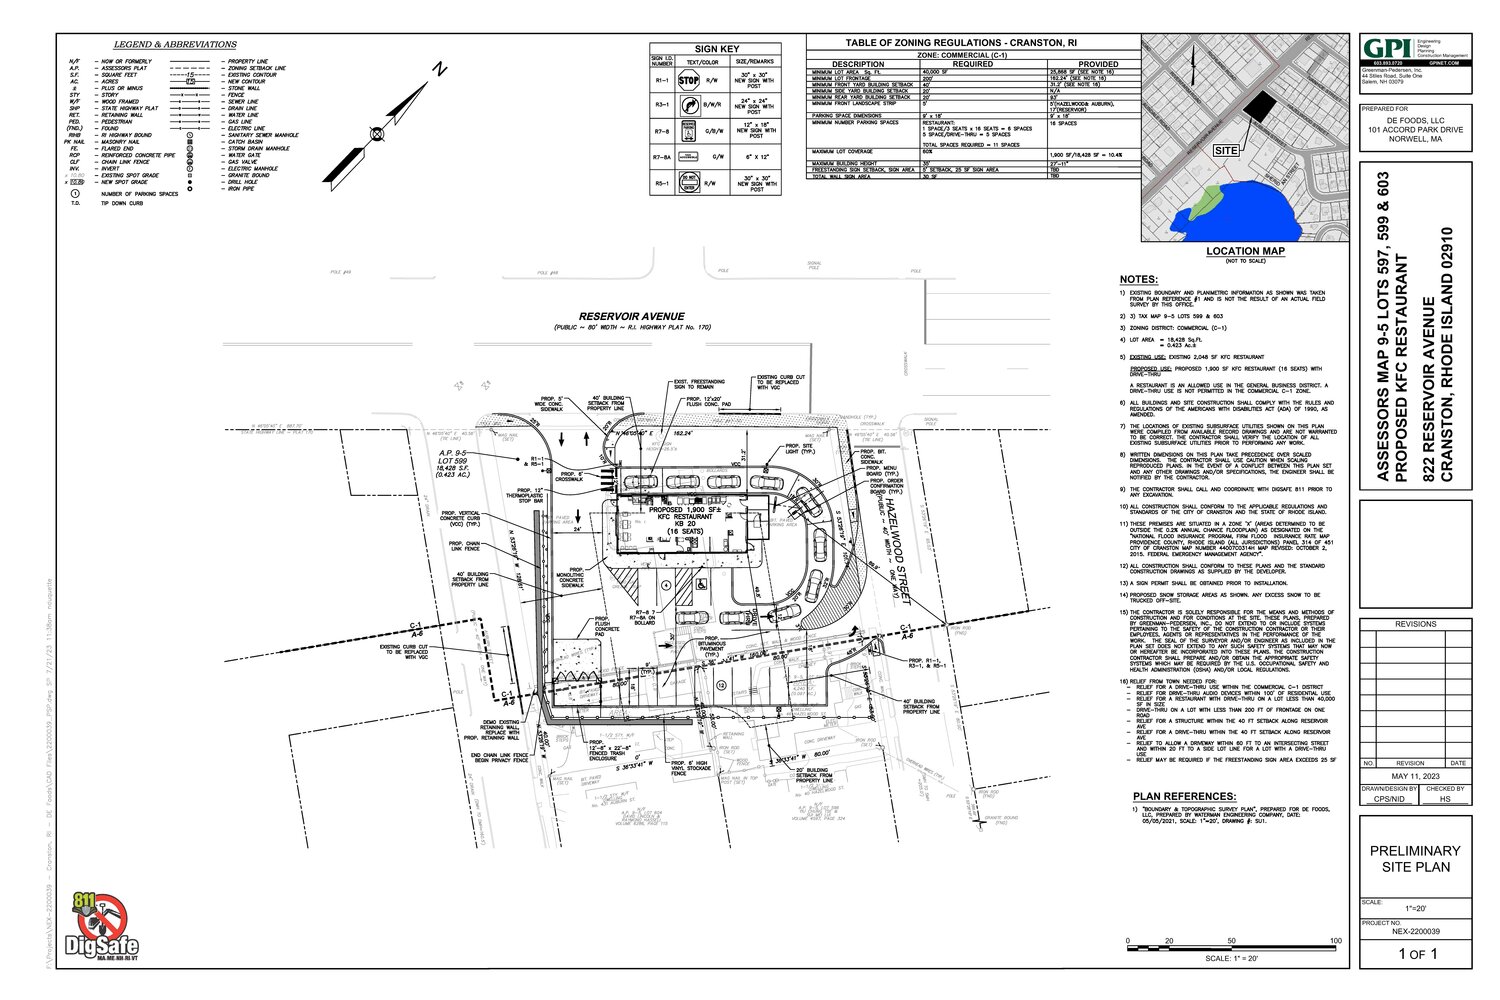 Site plan provided by DE Foods and Attorney Robert Murray. More detailed version available at 
www.cranstonri.gov/development-plan-review-8.2.2023/